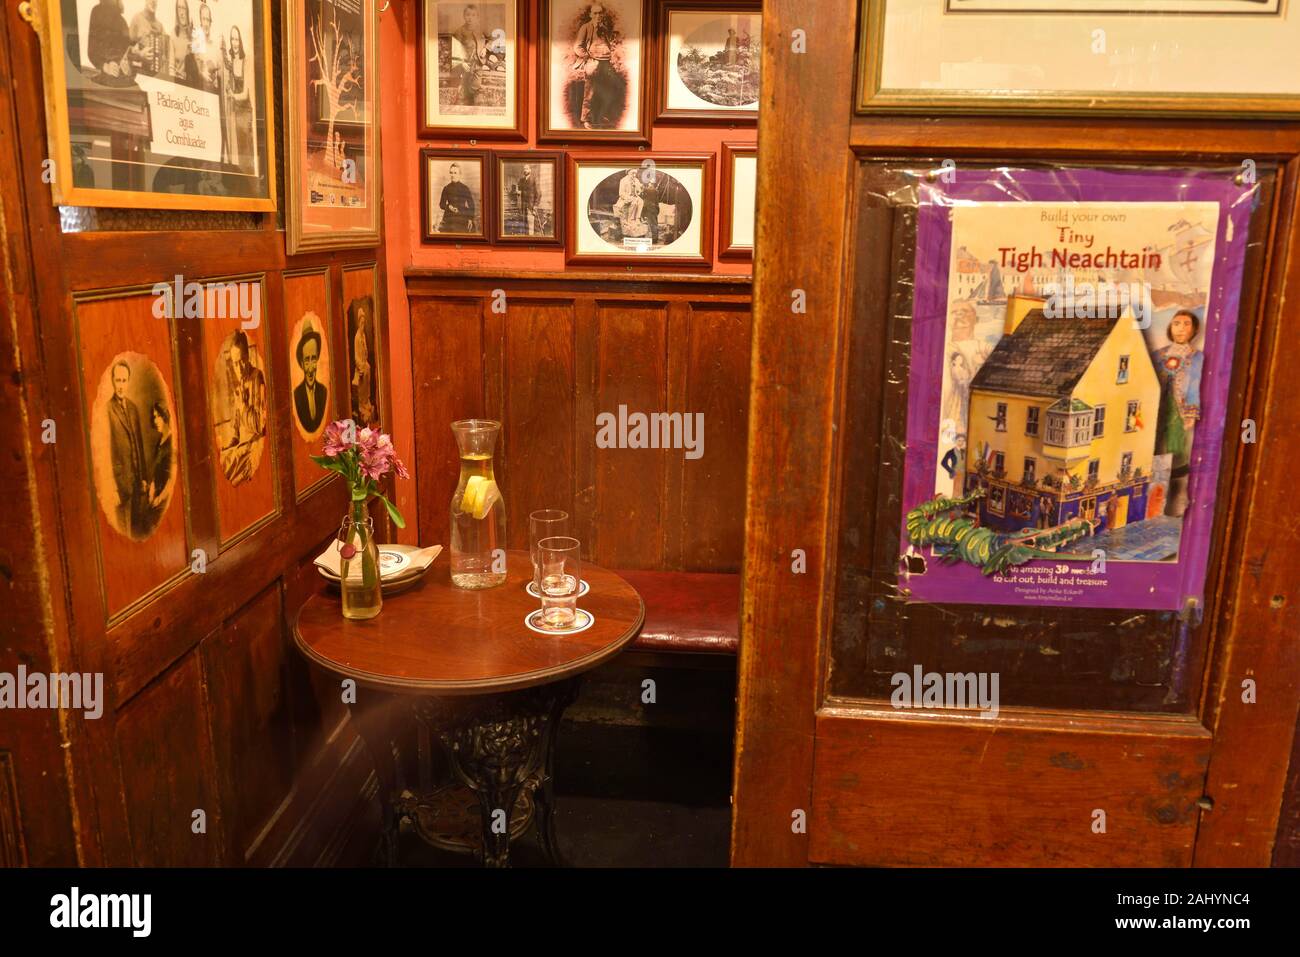 snug at Tigh Neachtain on the corner of Cross Street and Quay Street Galway, Connemara, County Galway, Republic of Ireland, North-western Europe. Stock Photo